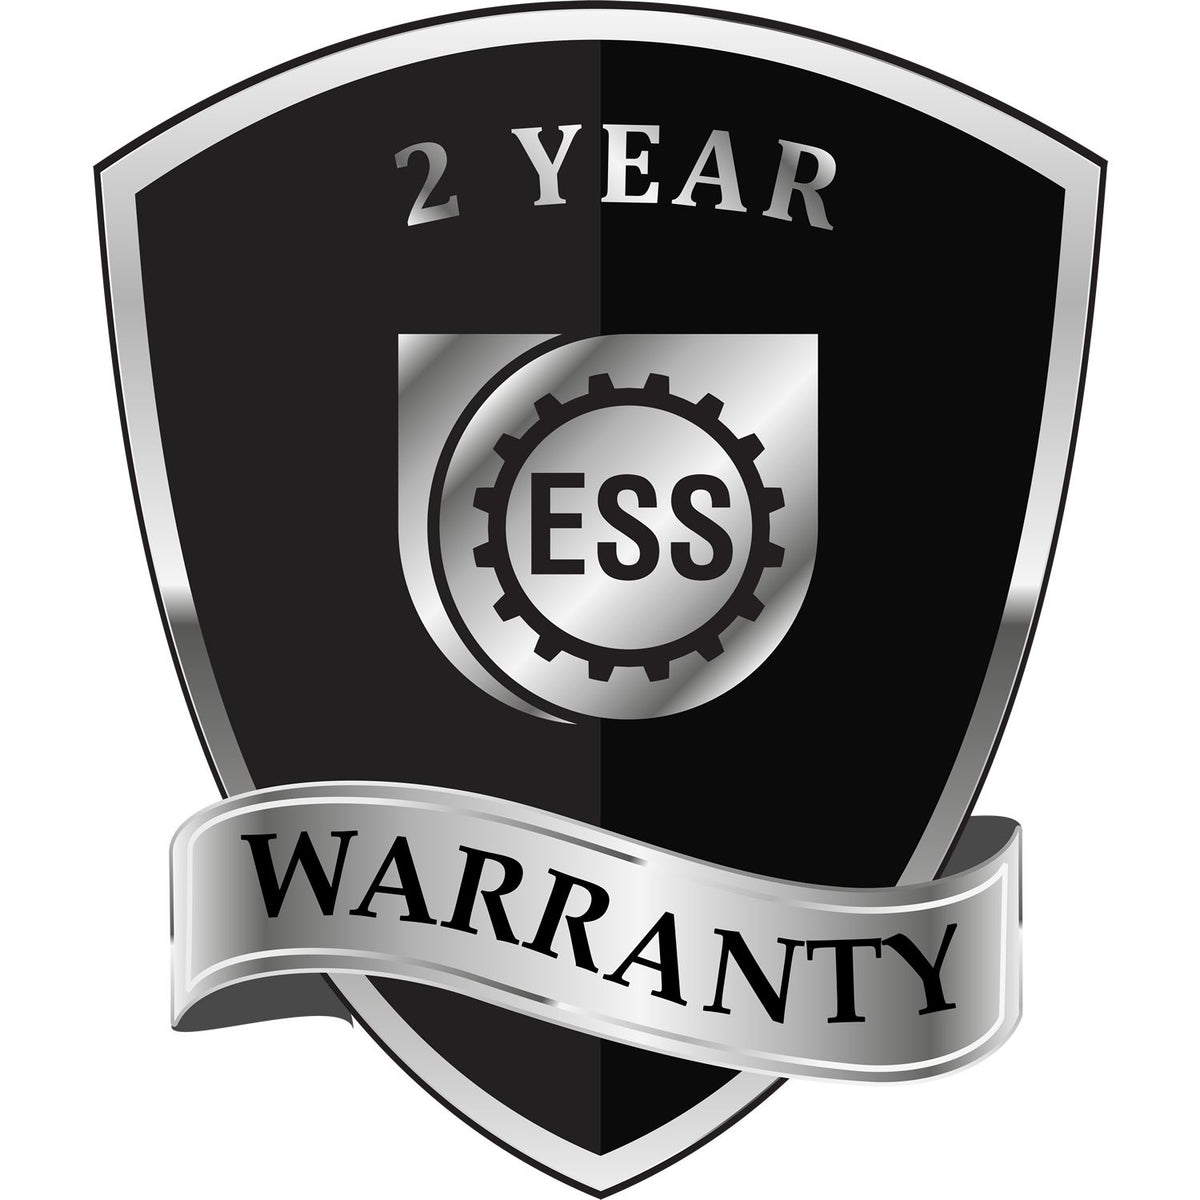 A black and silver badge or emblem showing warranty information for the Soft New Jersey Professional Geologist Seal